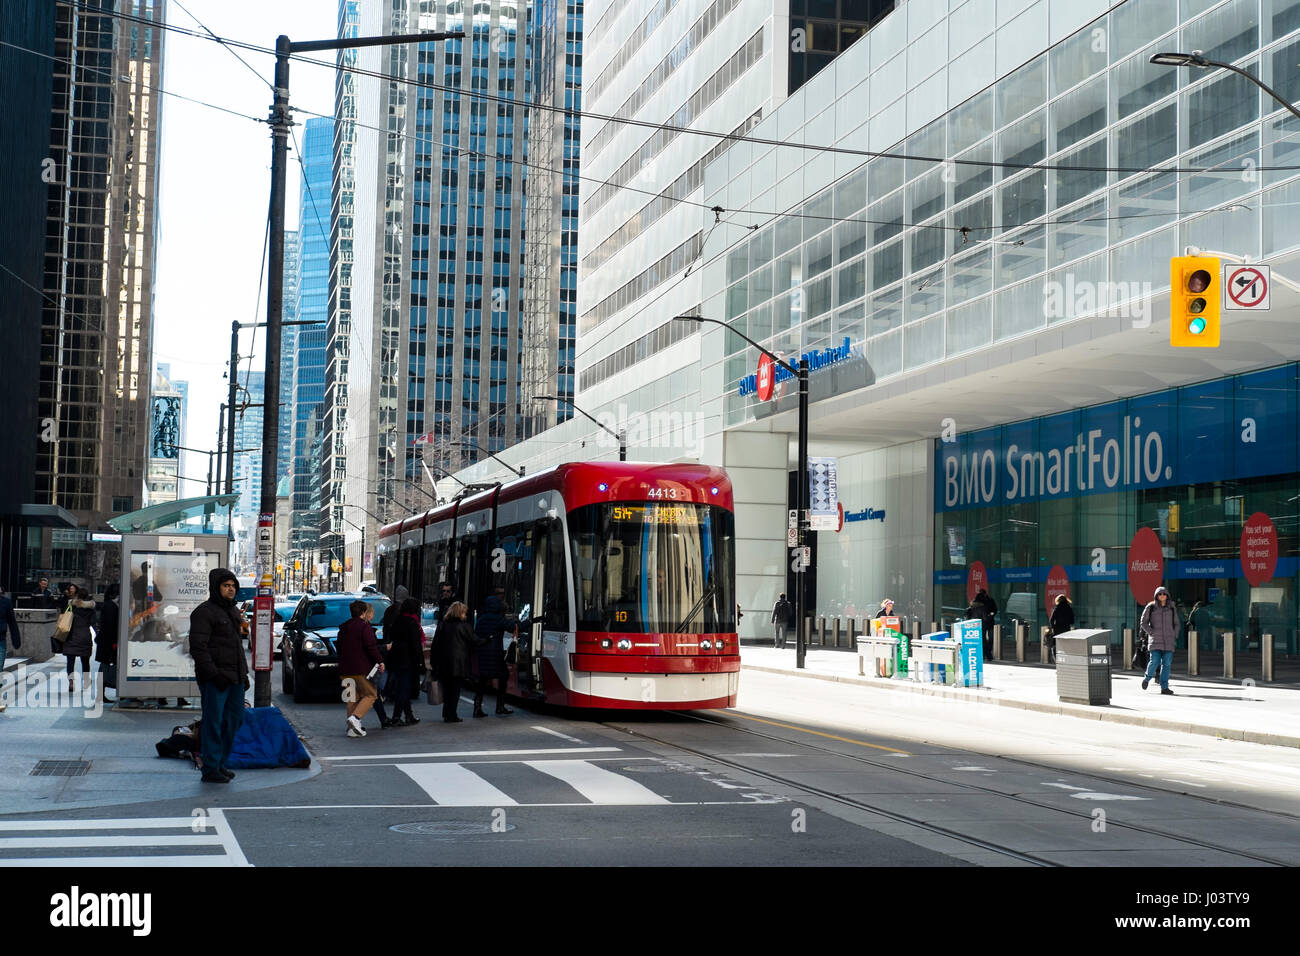 Street scene with tram passing BMO bank building in the Toronto Financial District, Ontario, Canada Stock Photo